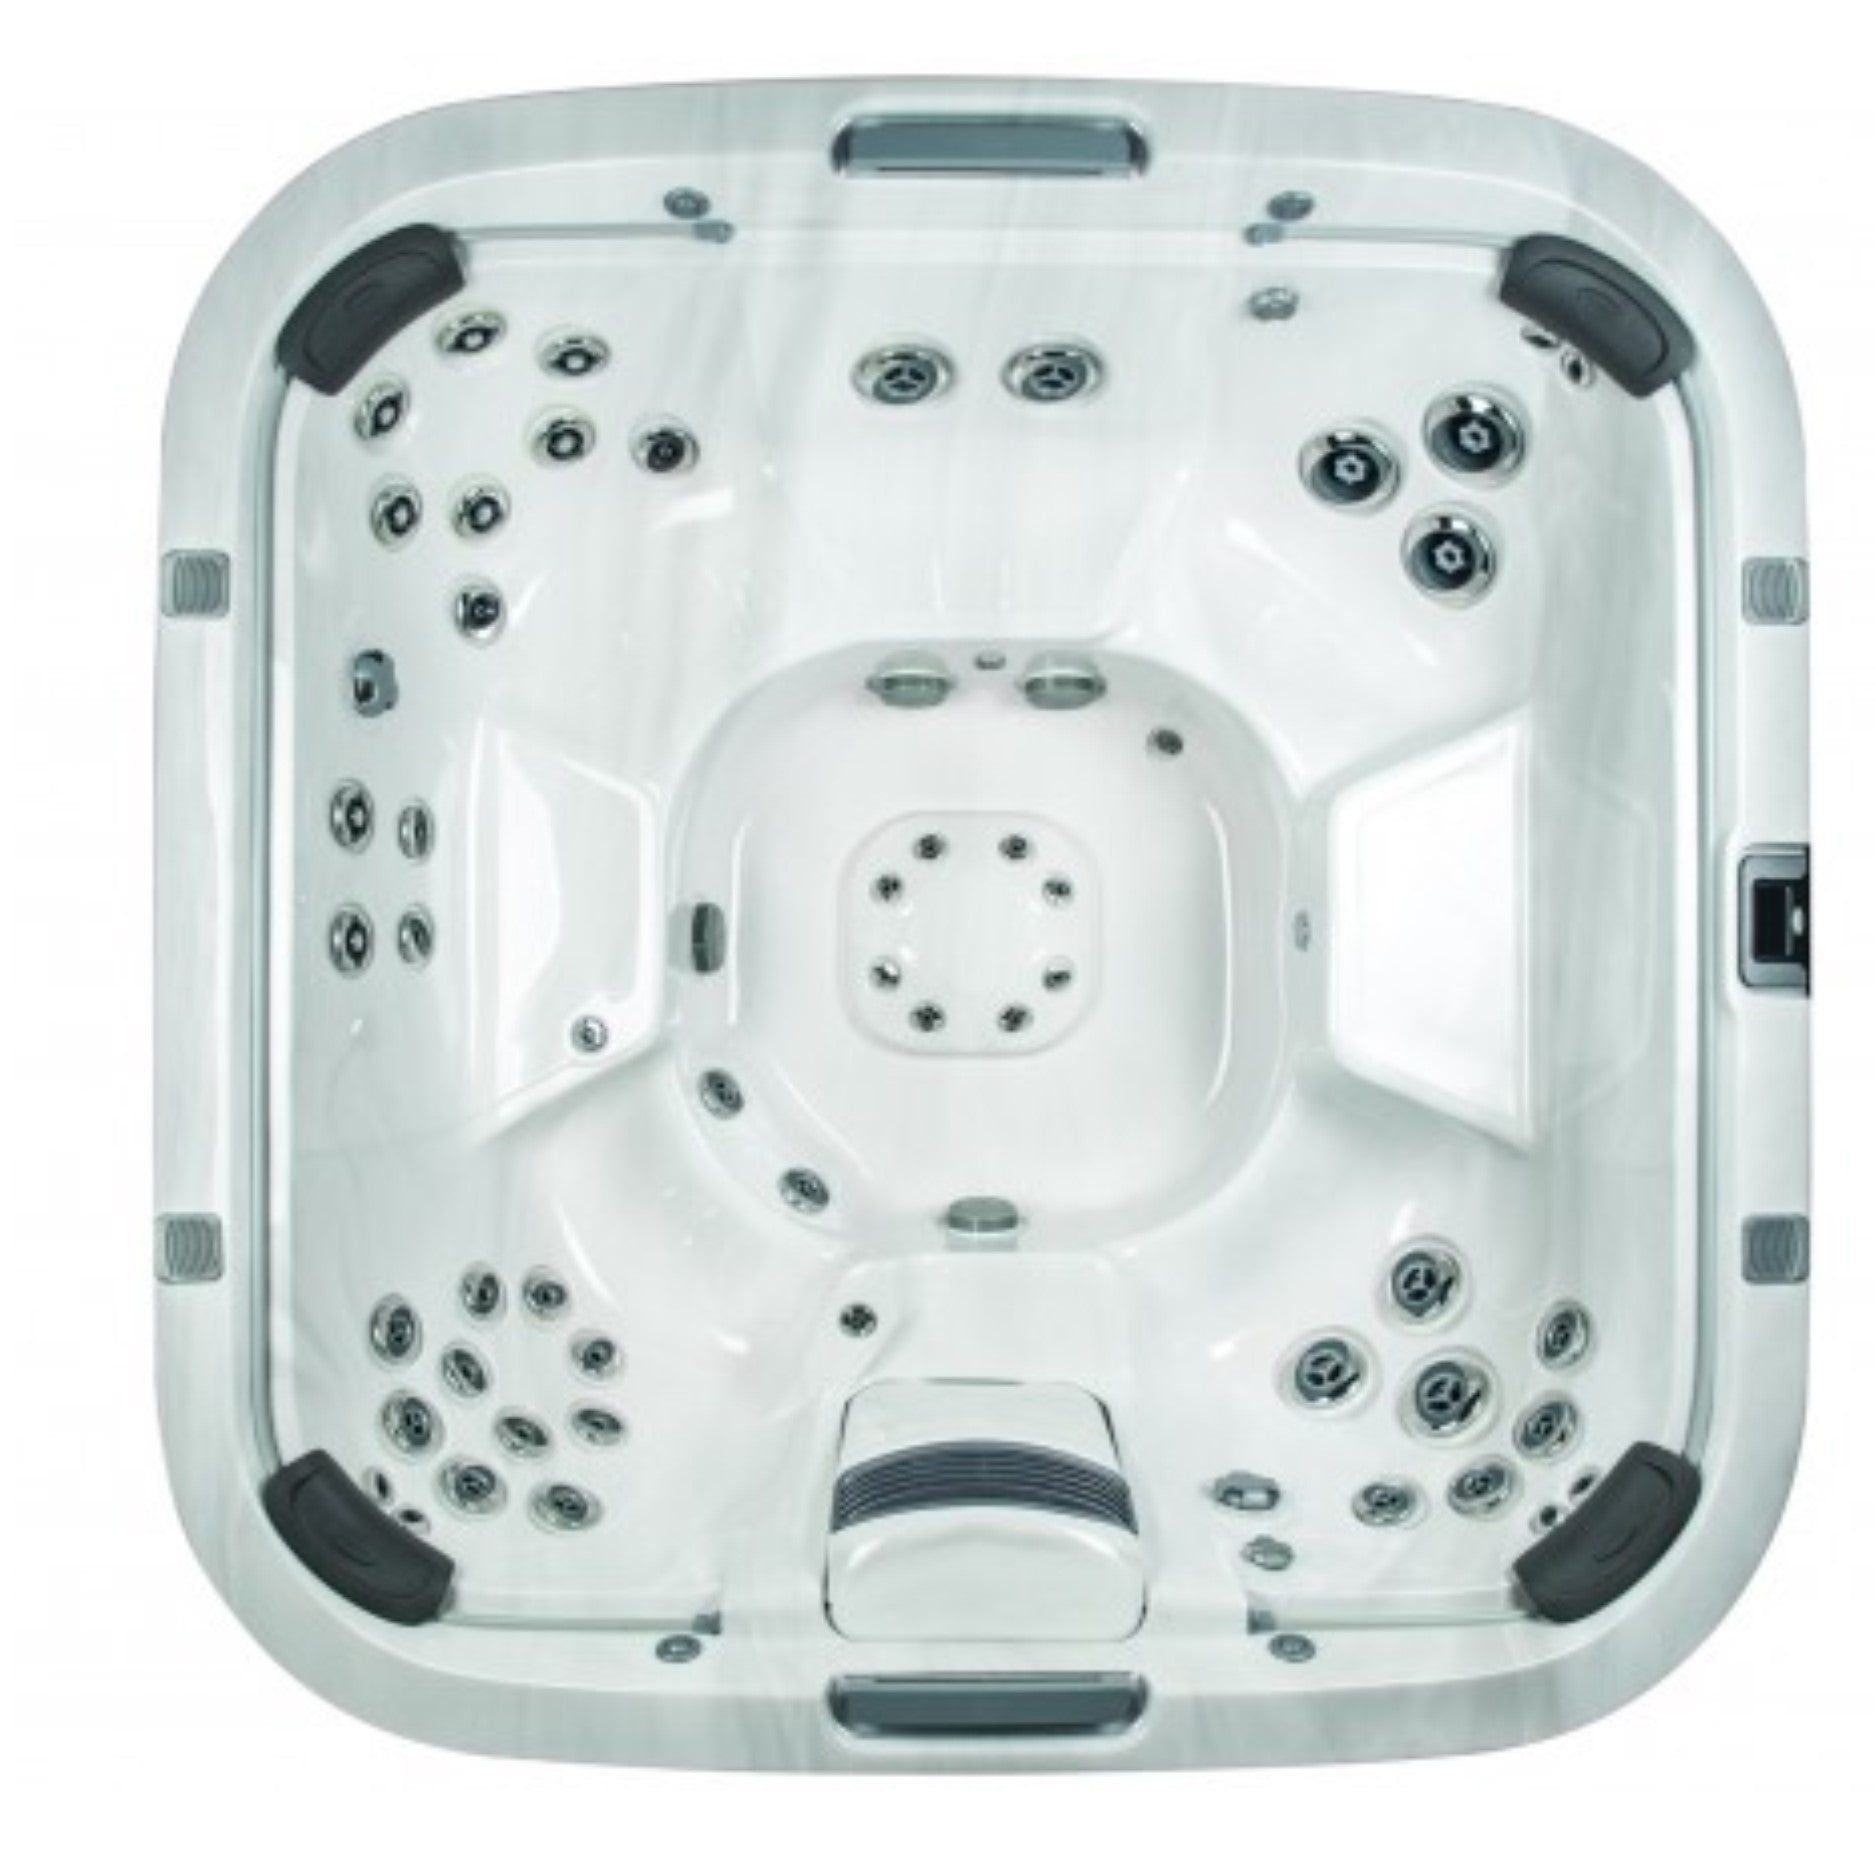 Buy A Jacuzzi J 585 Hot Tub Cover Online Jacuzzi Direct 